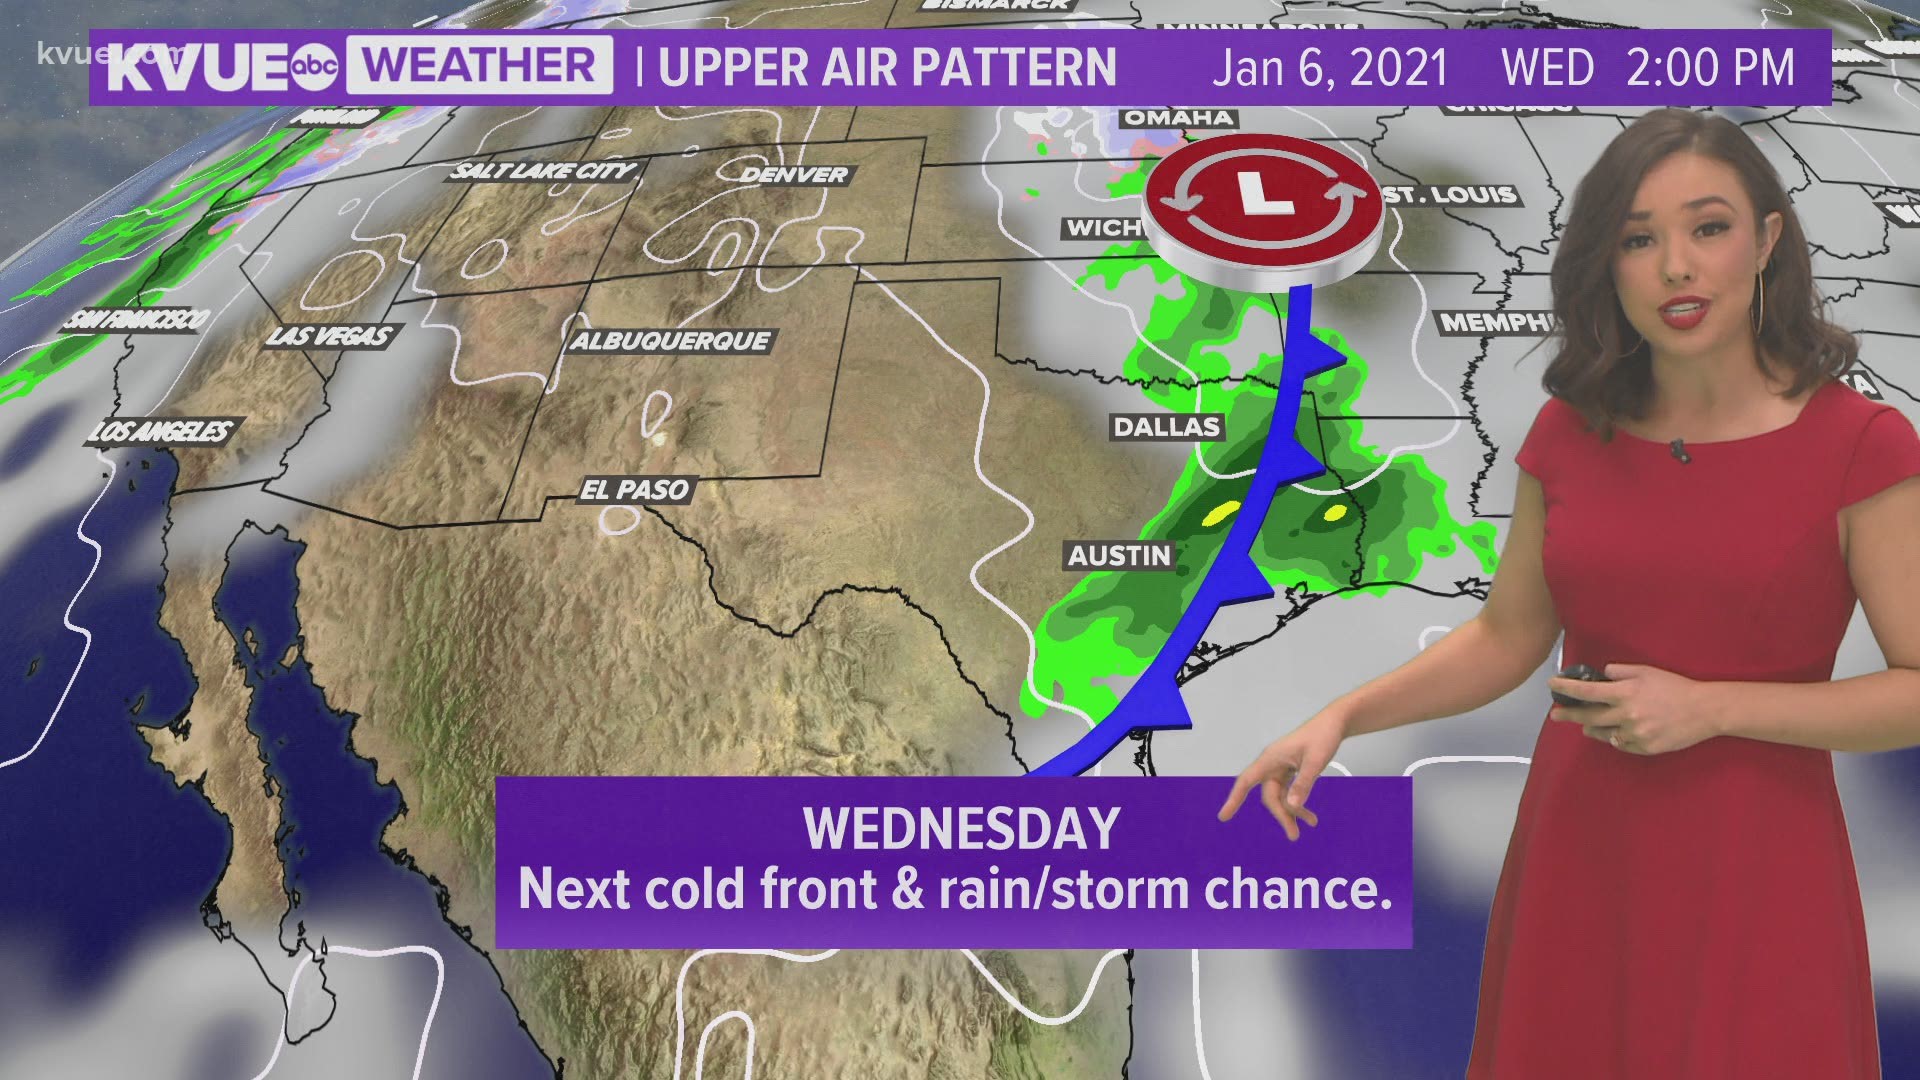 Cooler temperatures ahead with rain chances mid-week.